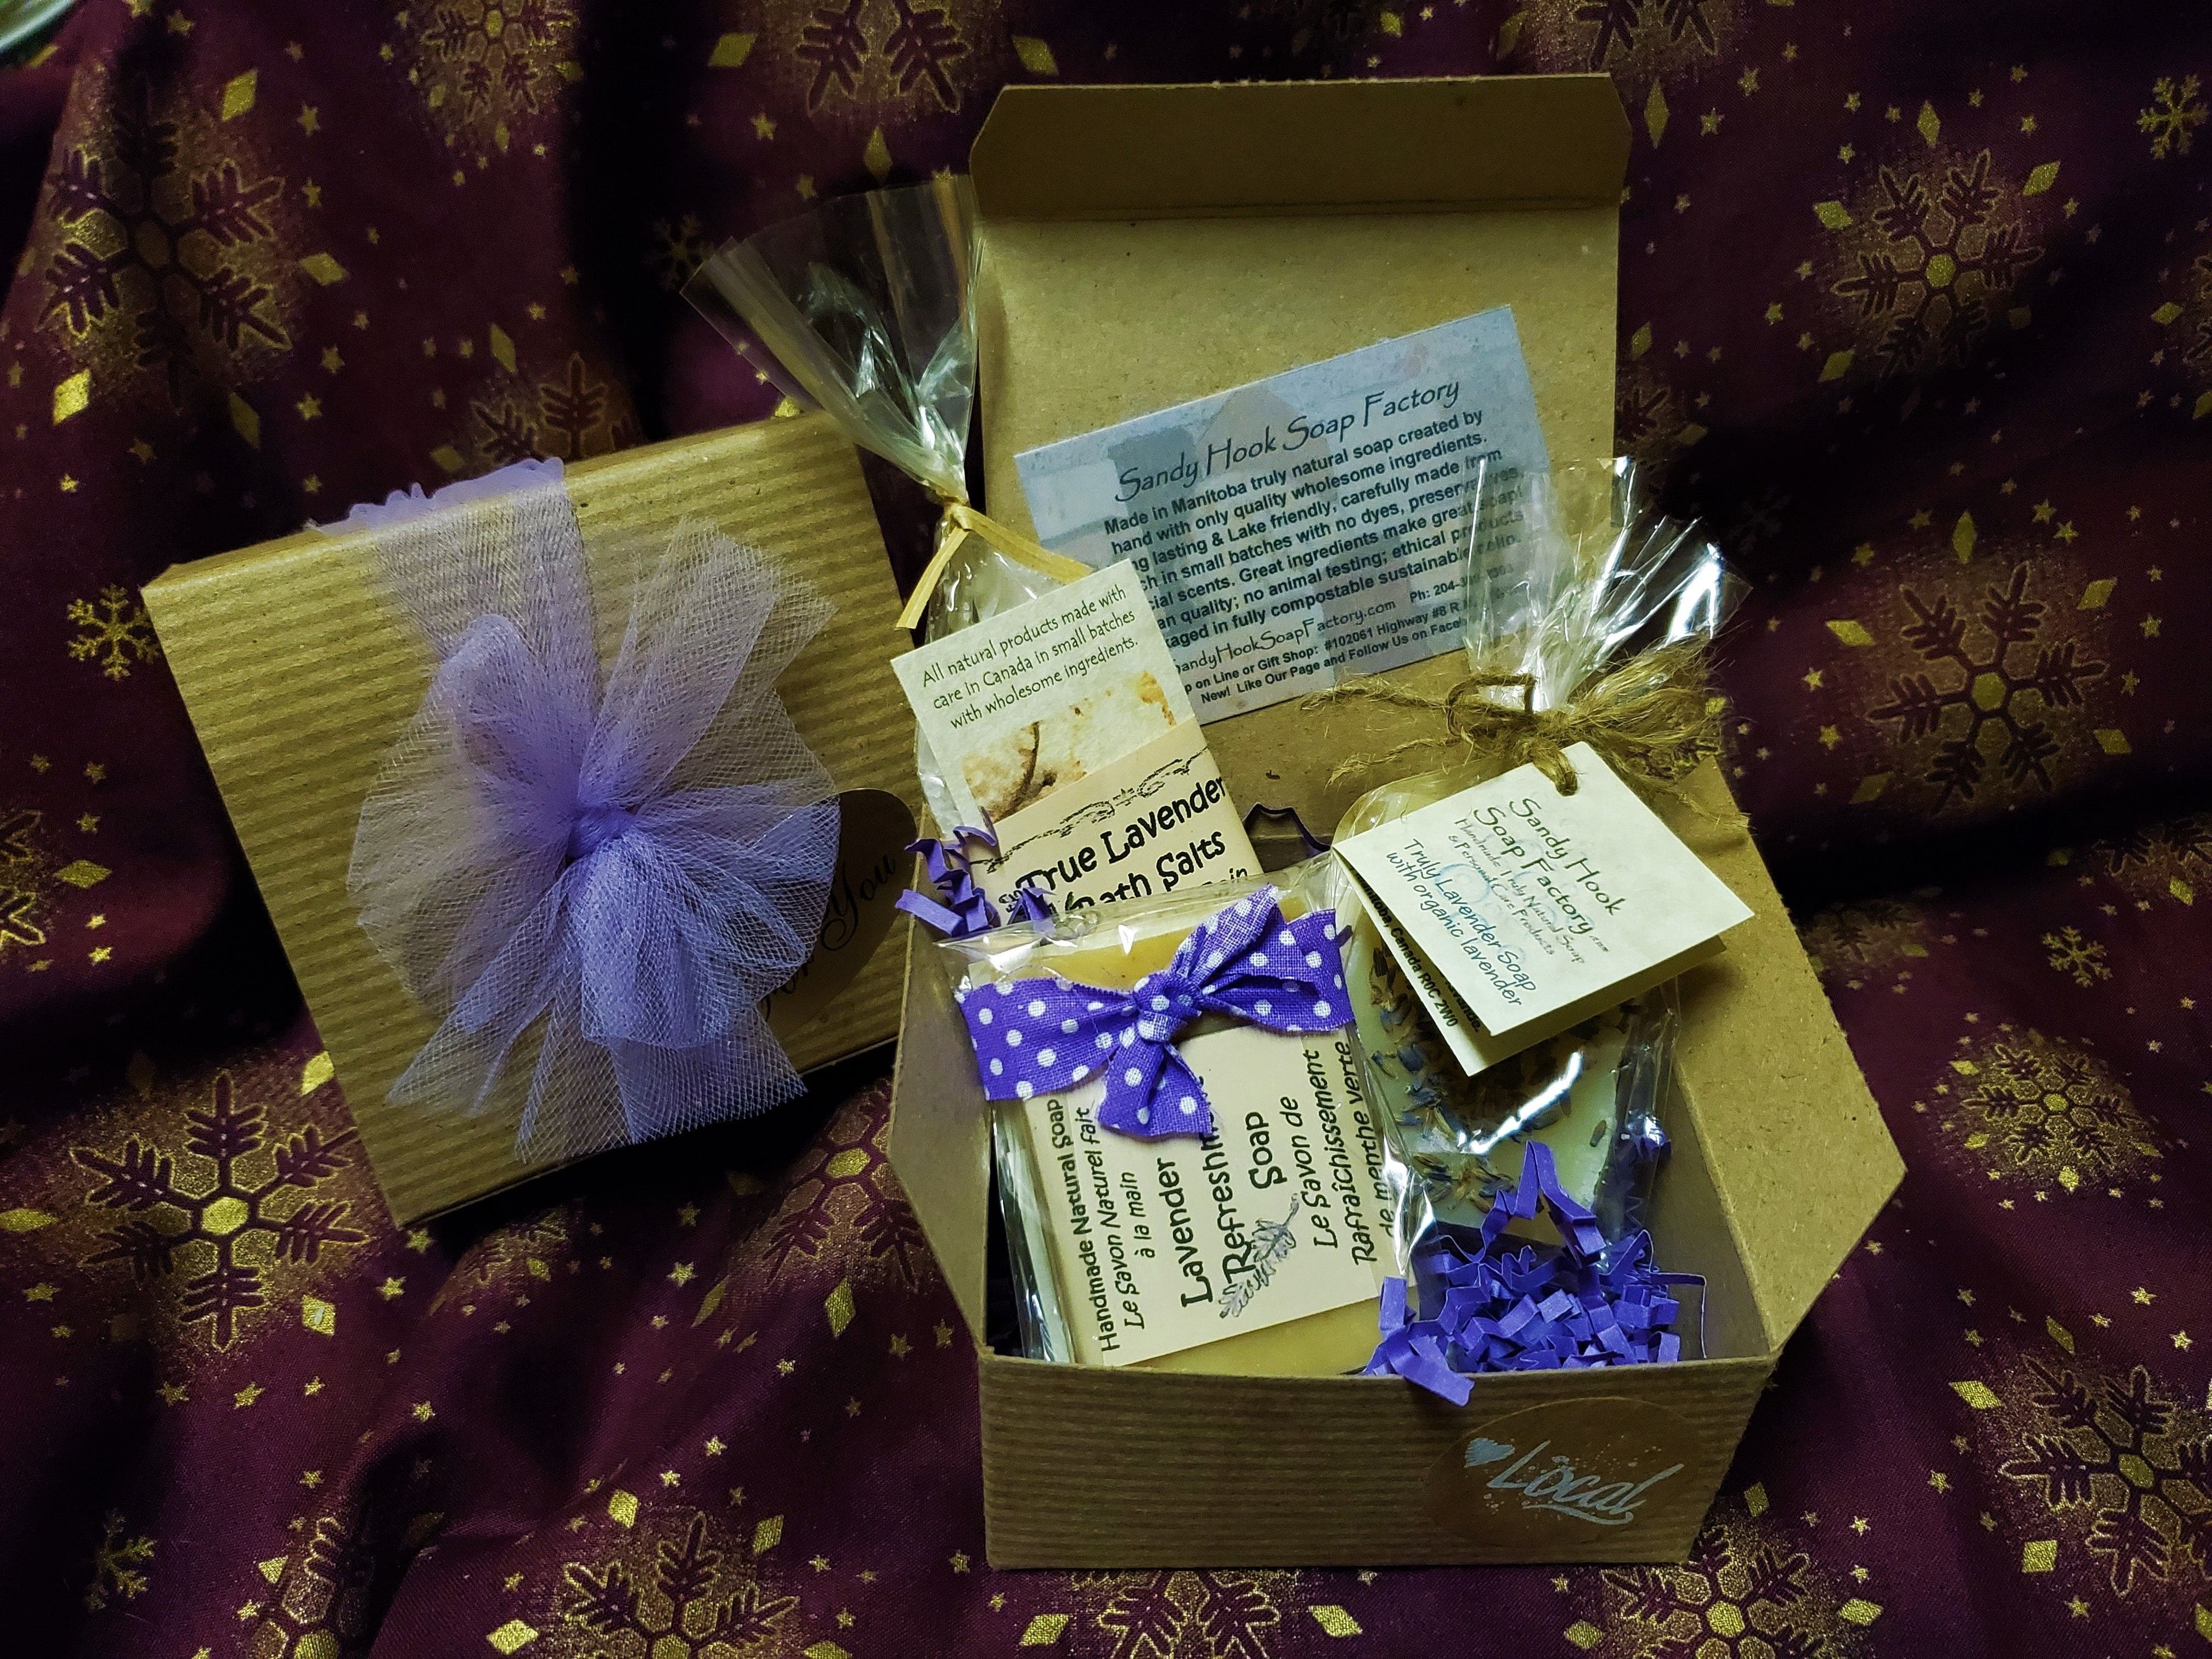 We create handmade,  attractive and inexpensive soap gifts Manitoba-made.  All natural products made in small batches from fine, wholesome ingredients,